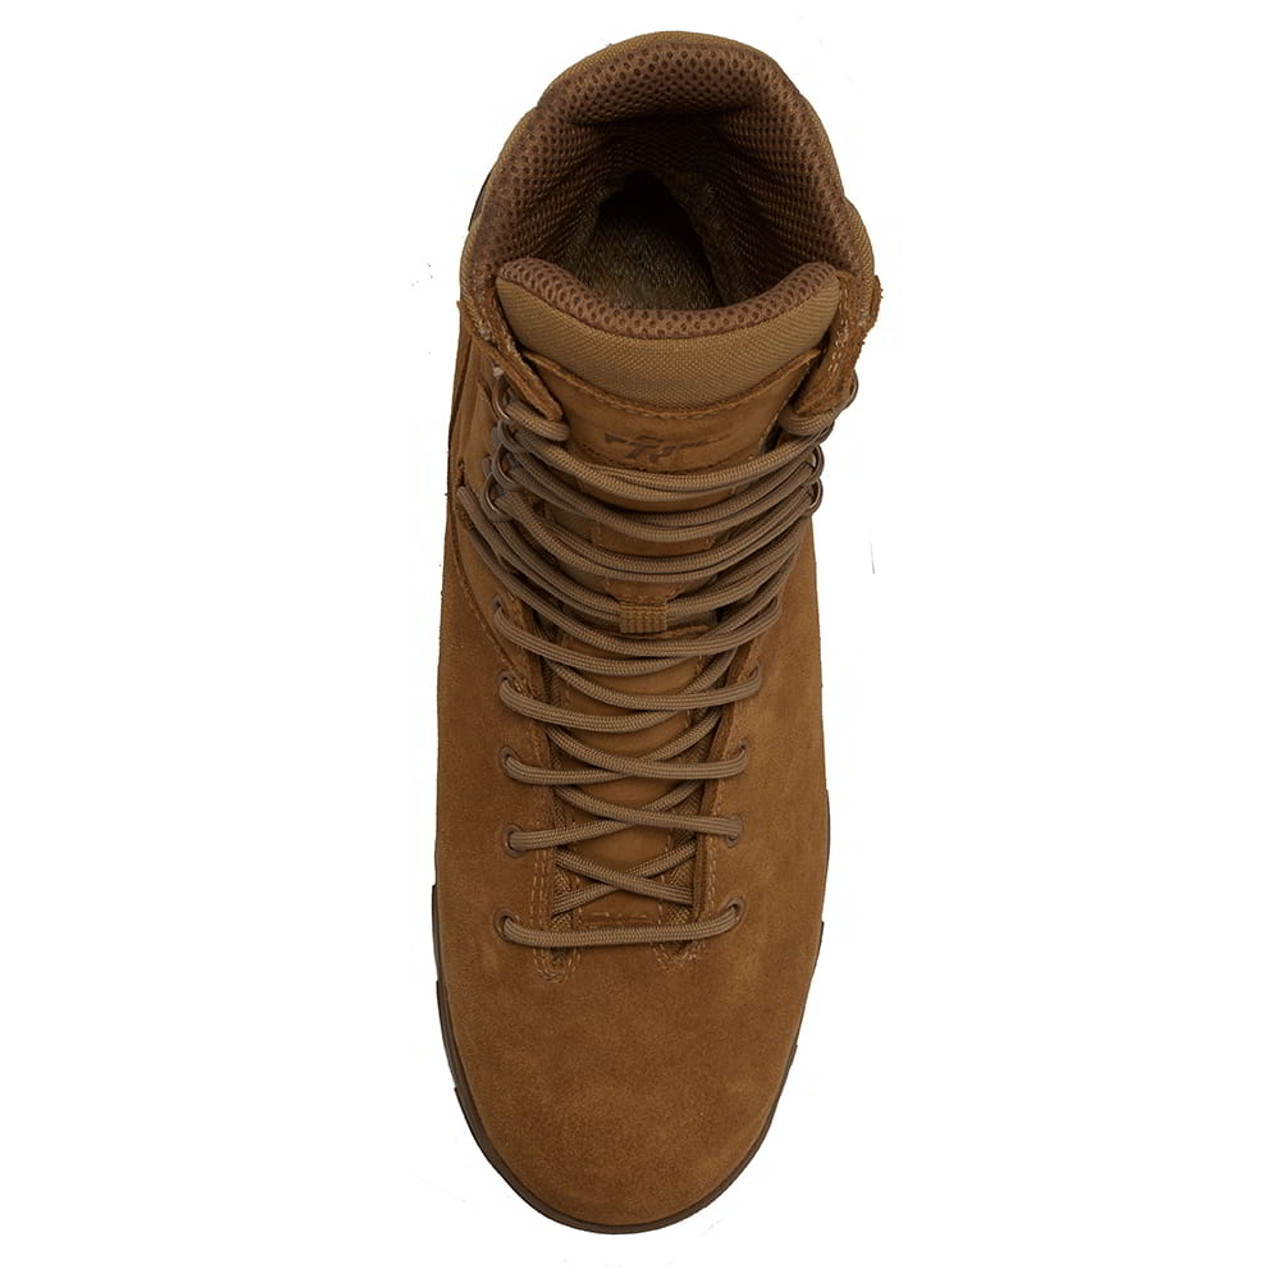 Belleville Squall Comp Toe Cold Weather Boot - Coyote - Kel-Lac ...